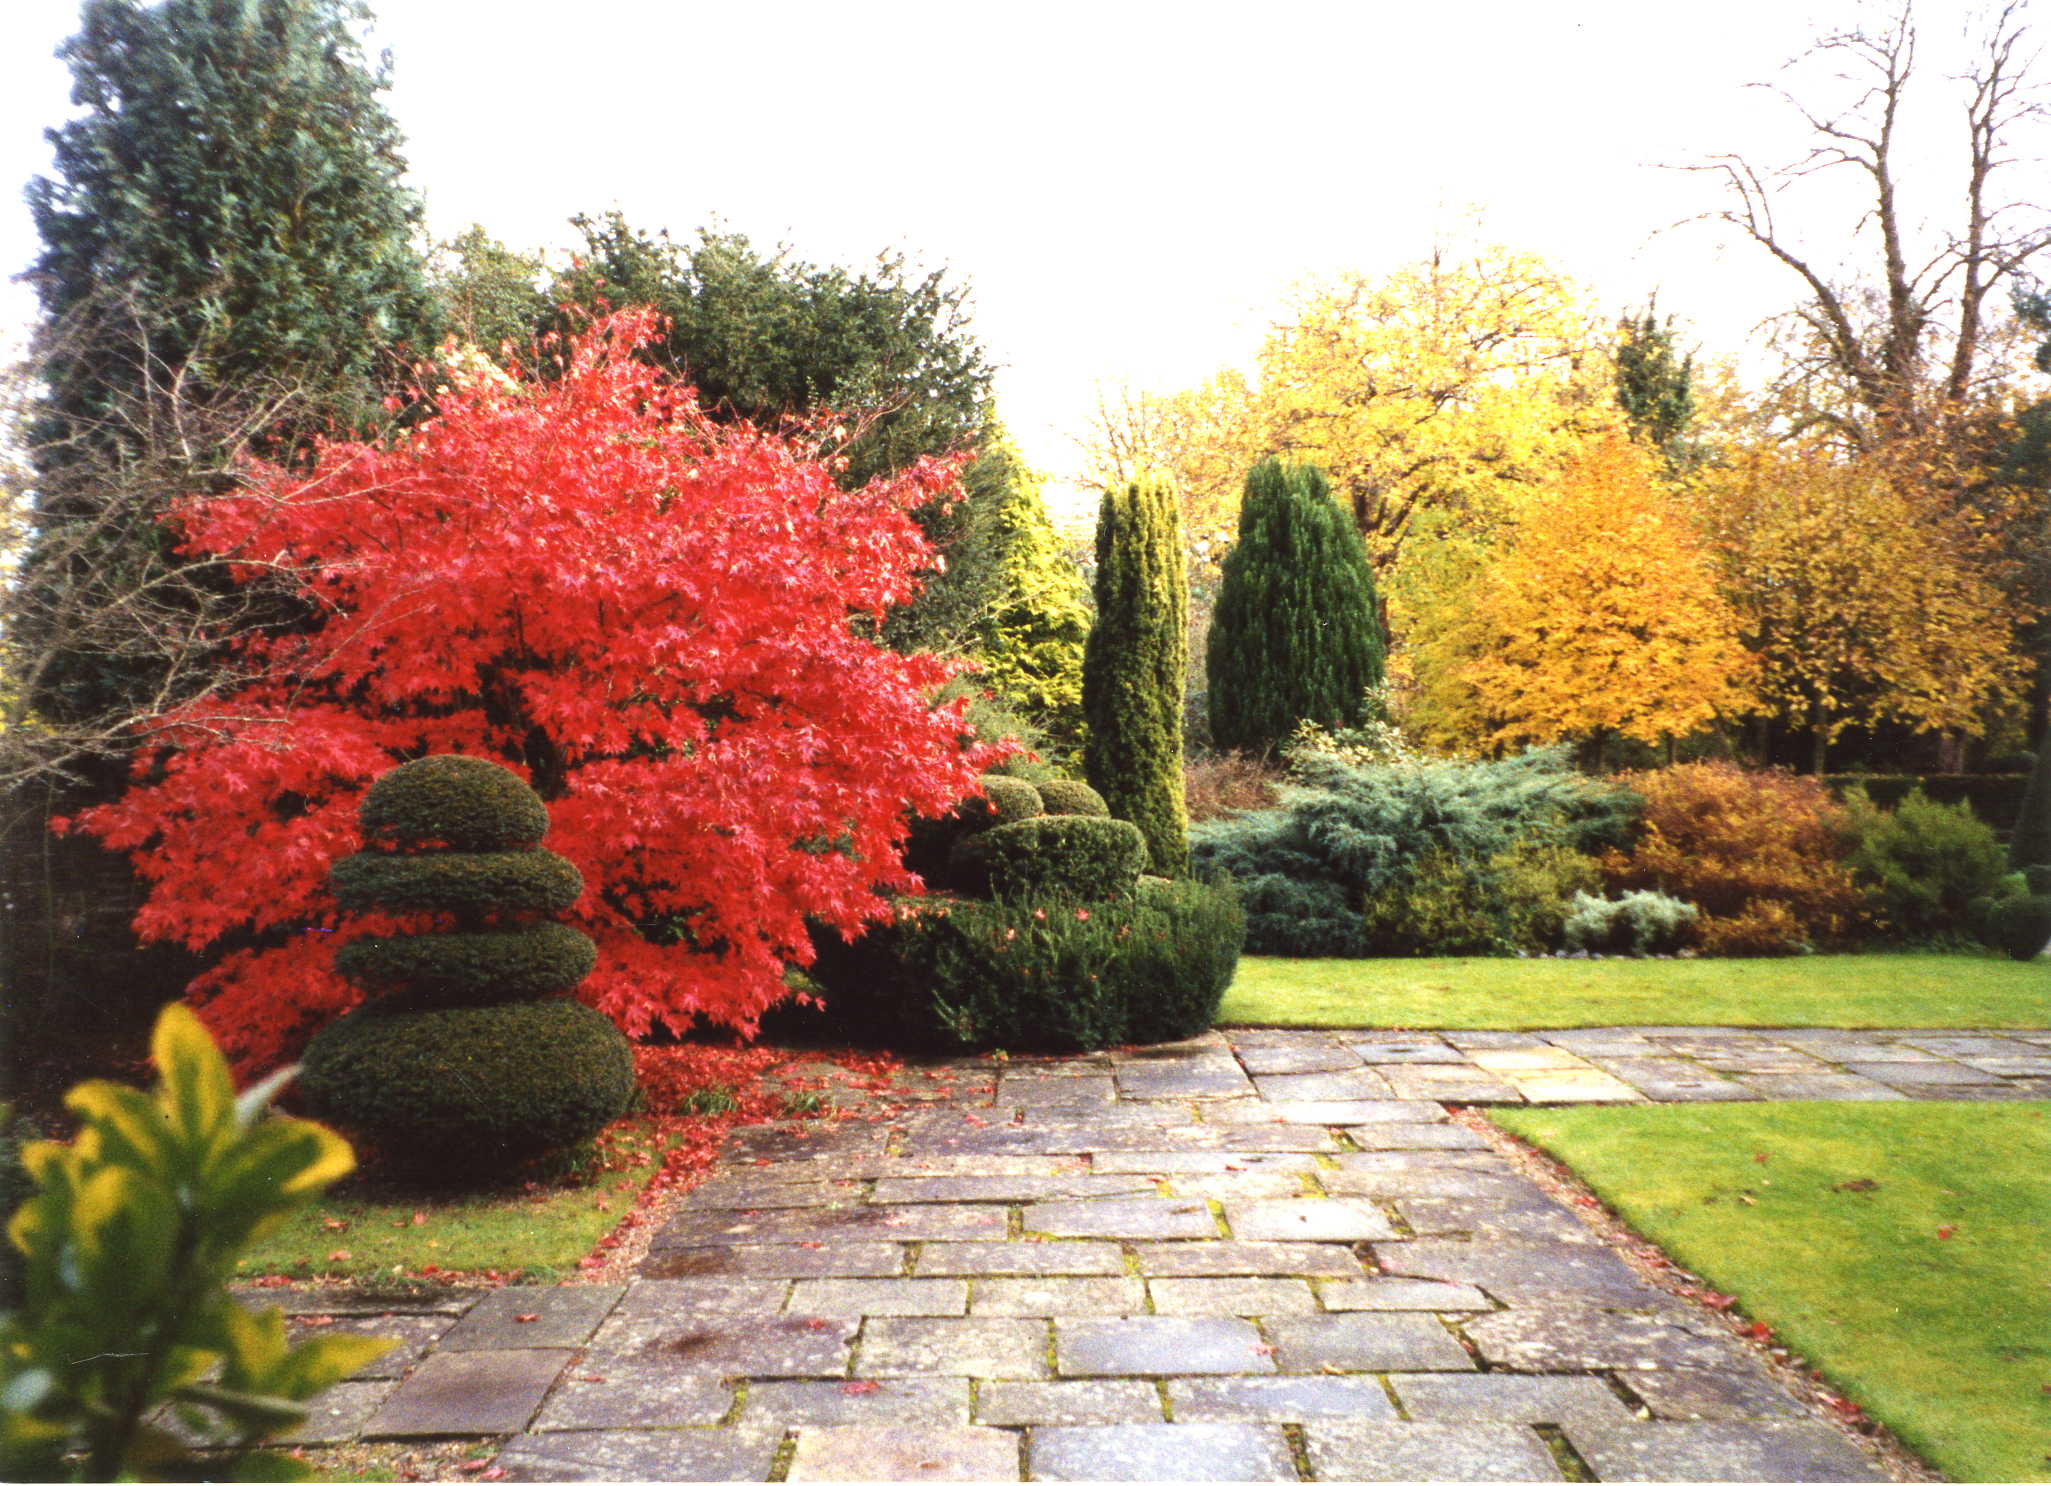 Autumnal trees and topiary in the Topiary Garden